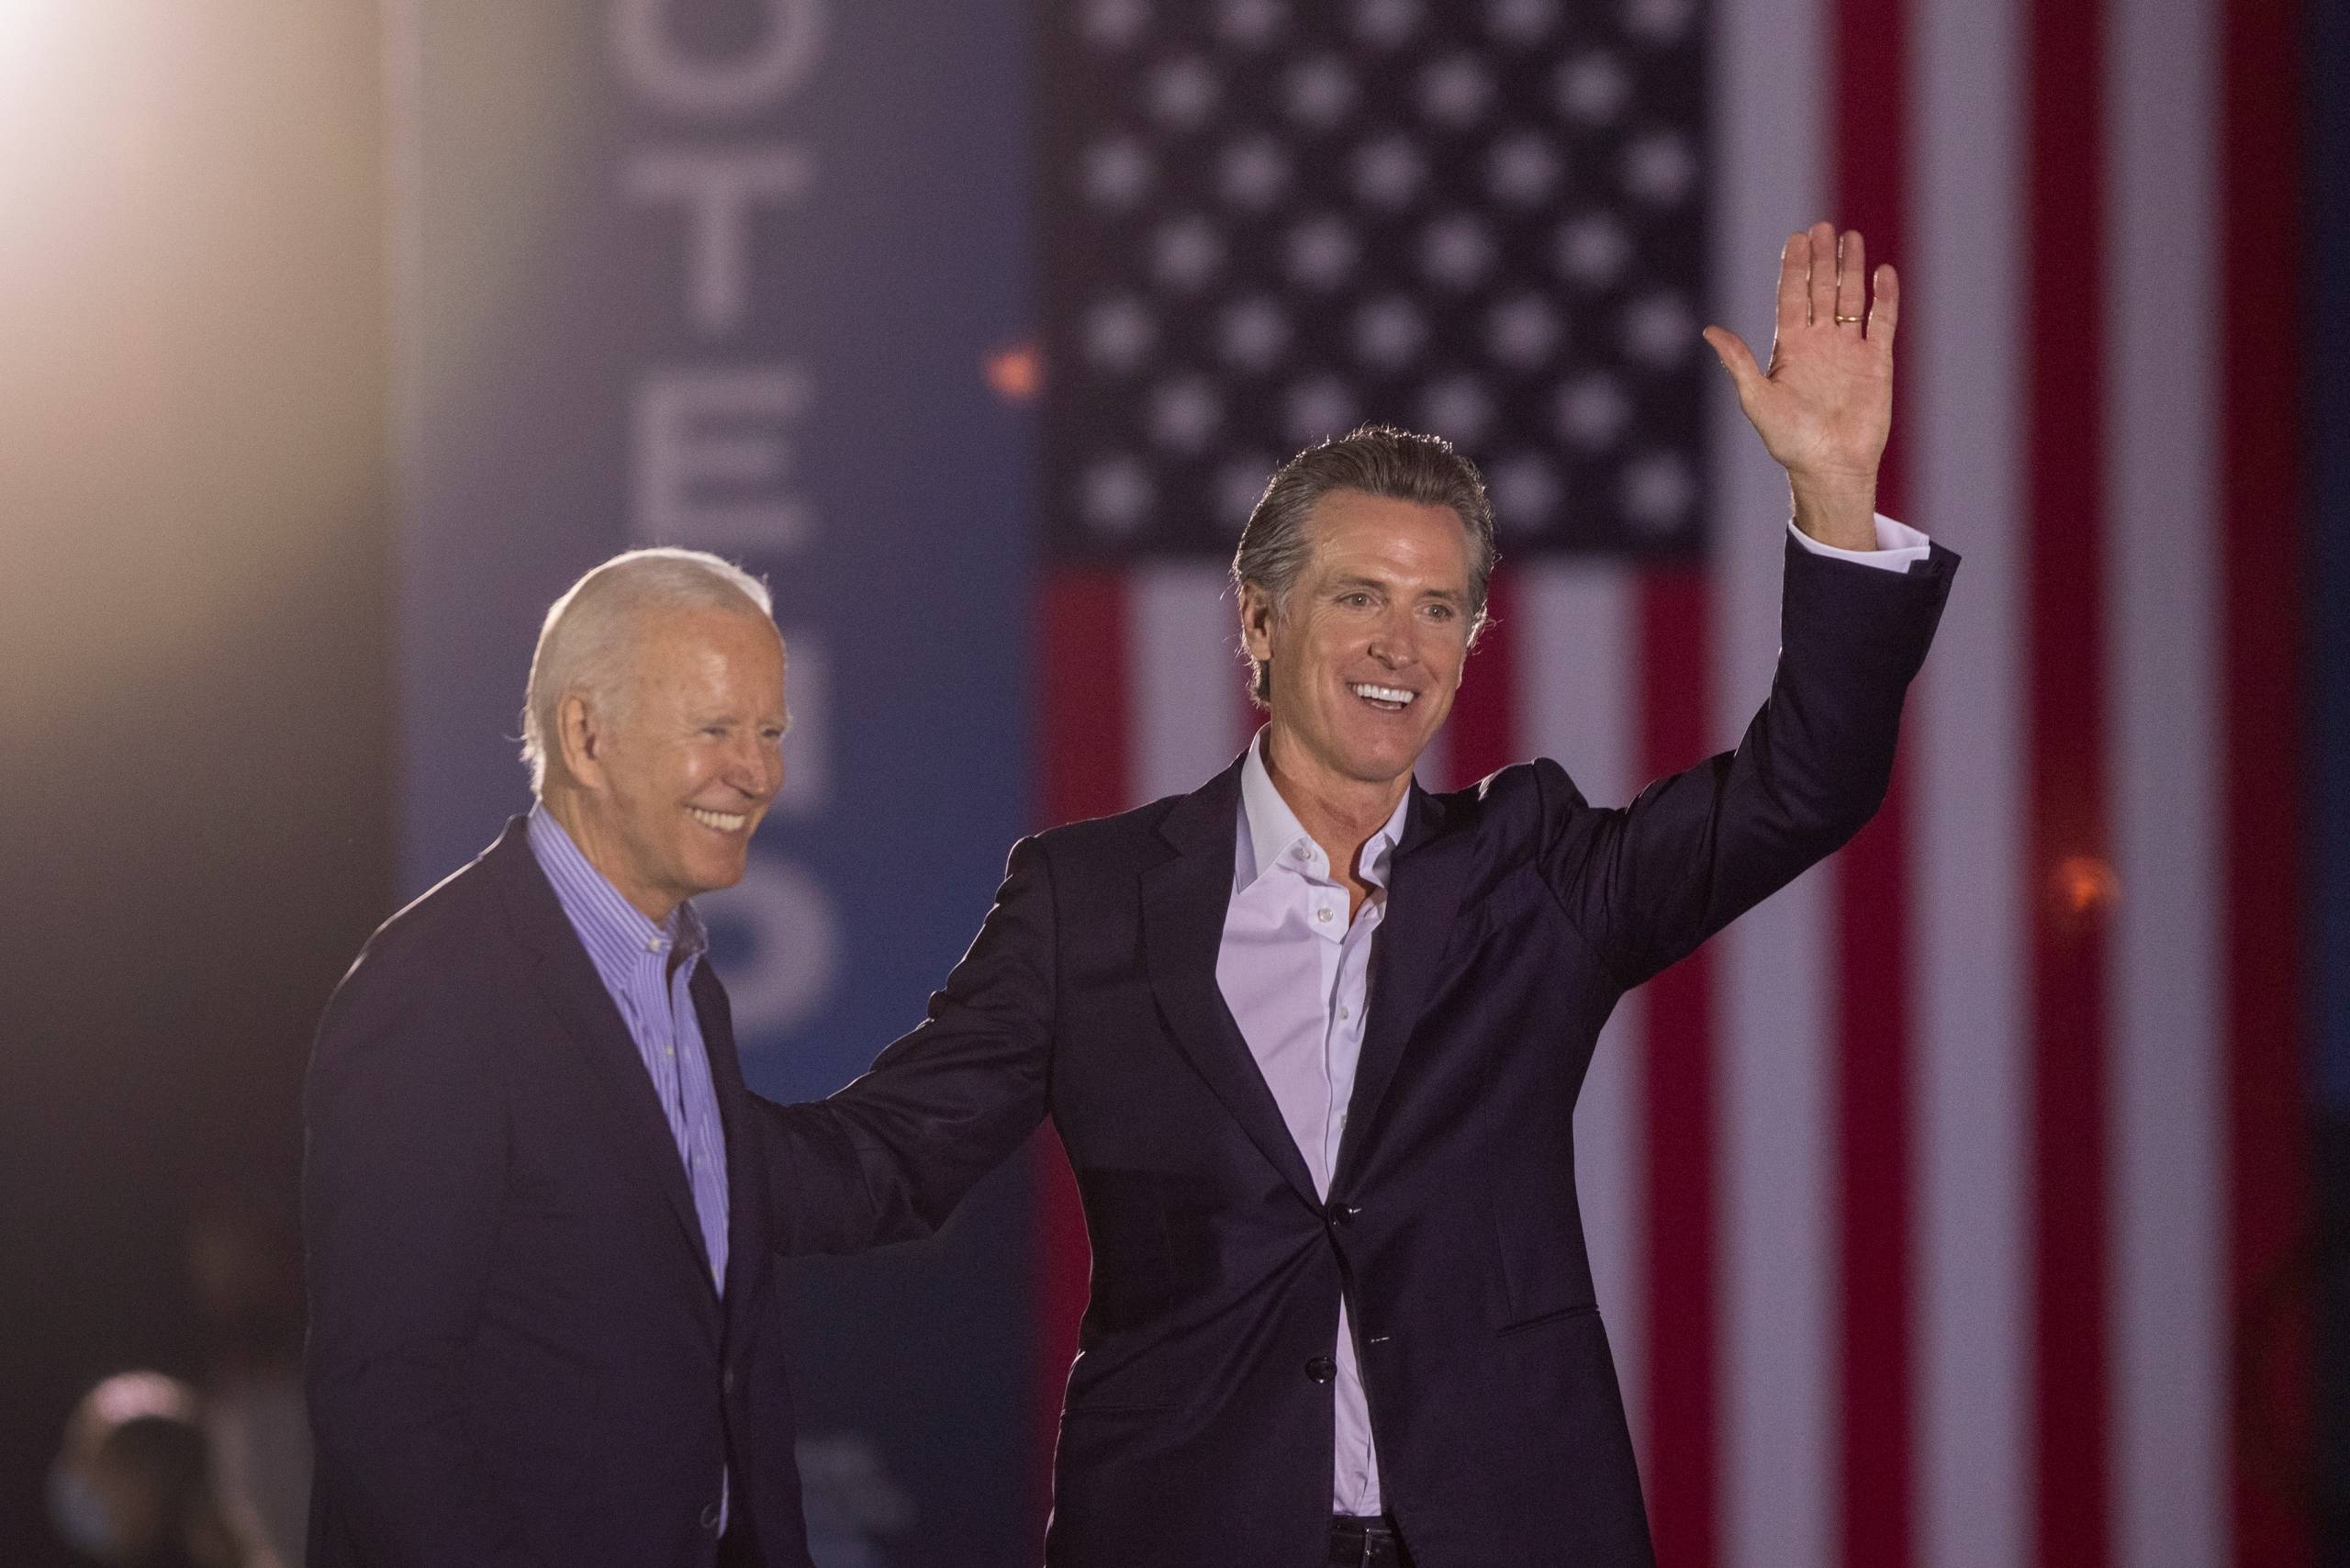 President Joe Biden and Gov. Gavin Newsom, waving, smile as they stand stand before an American flag.